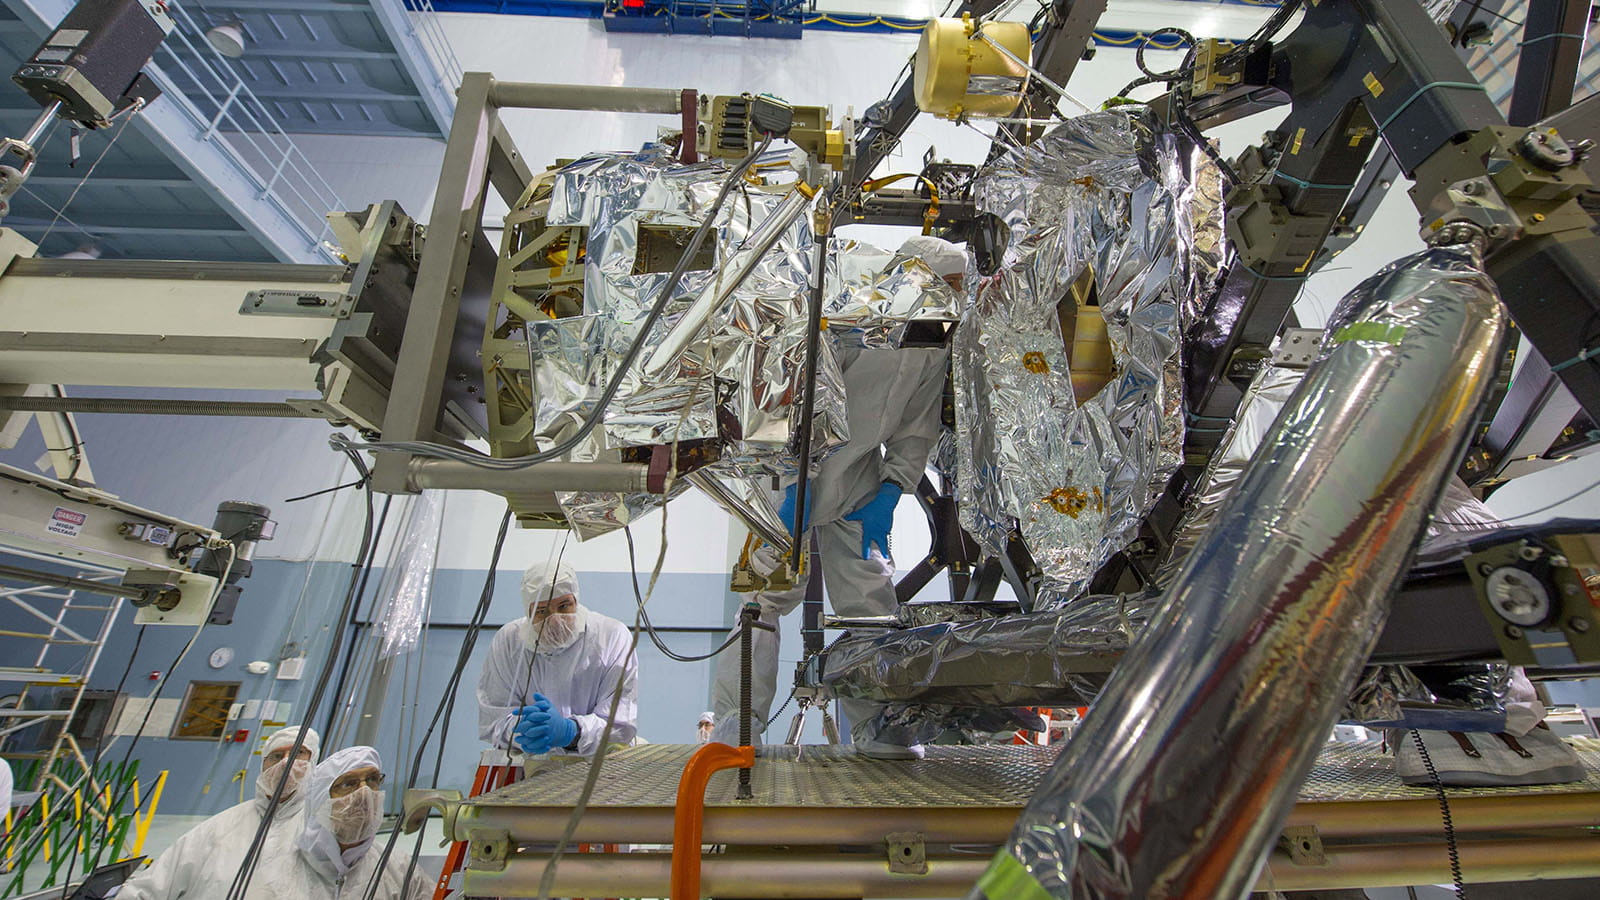 Engineers worked meticulously to implant the James Webb Space Telescope's Mid-Infrared Instrument into the ISIM, or Integrated Science Instrument Module